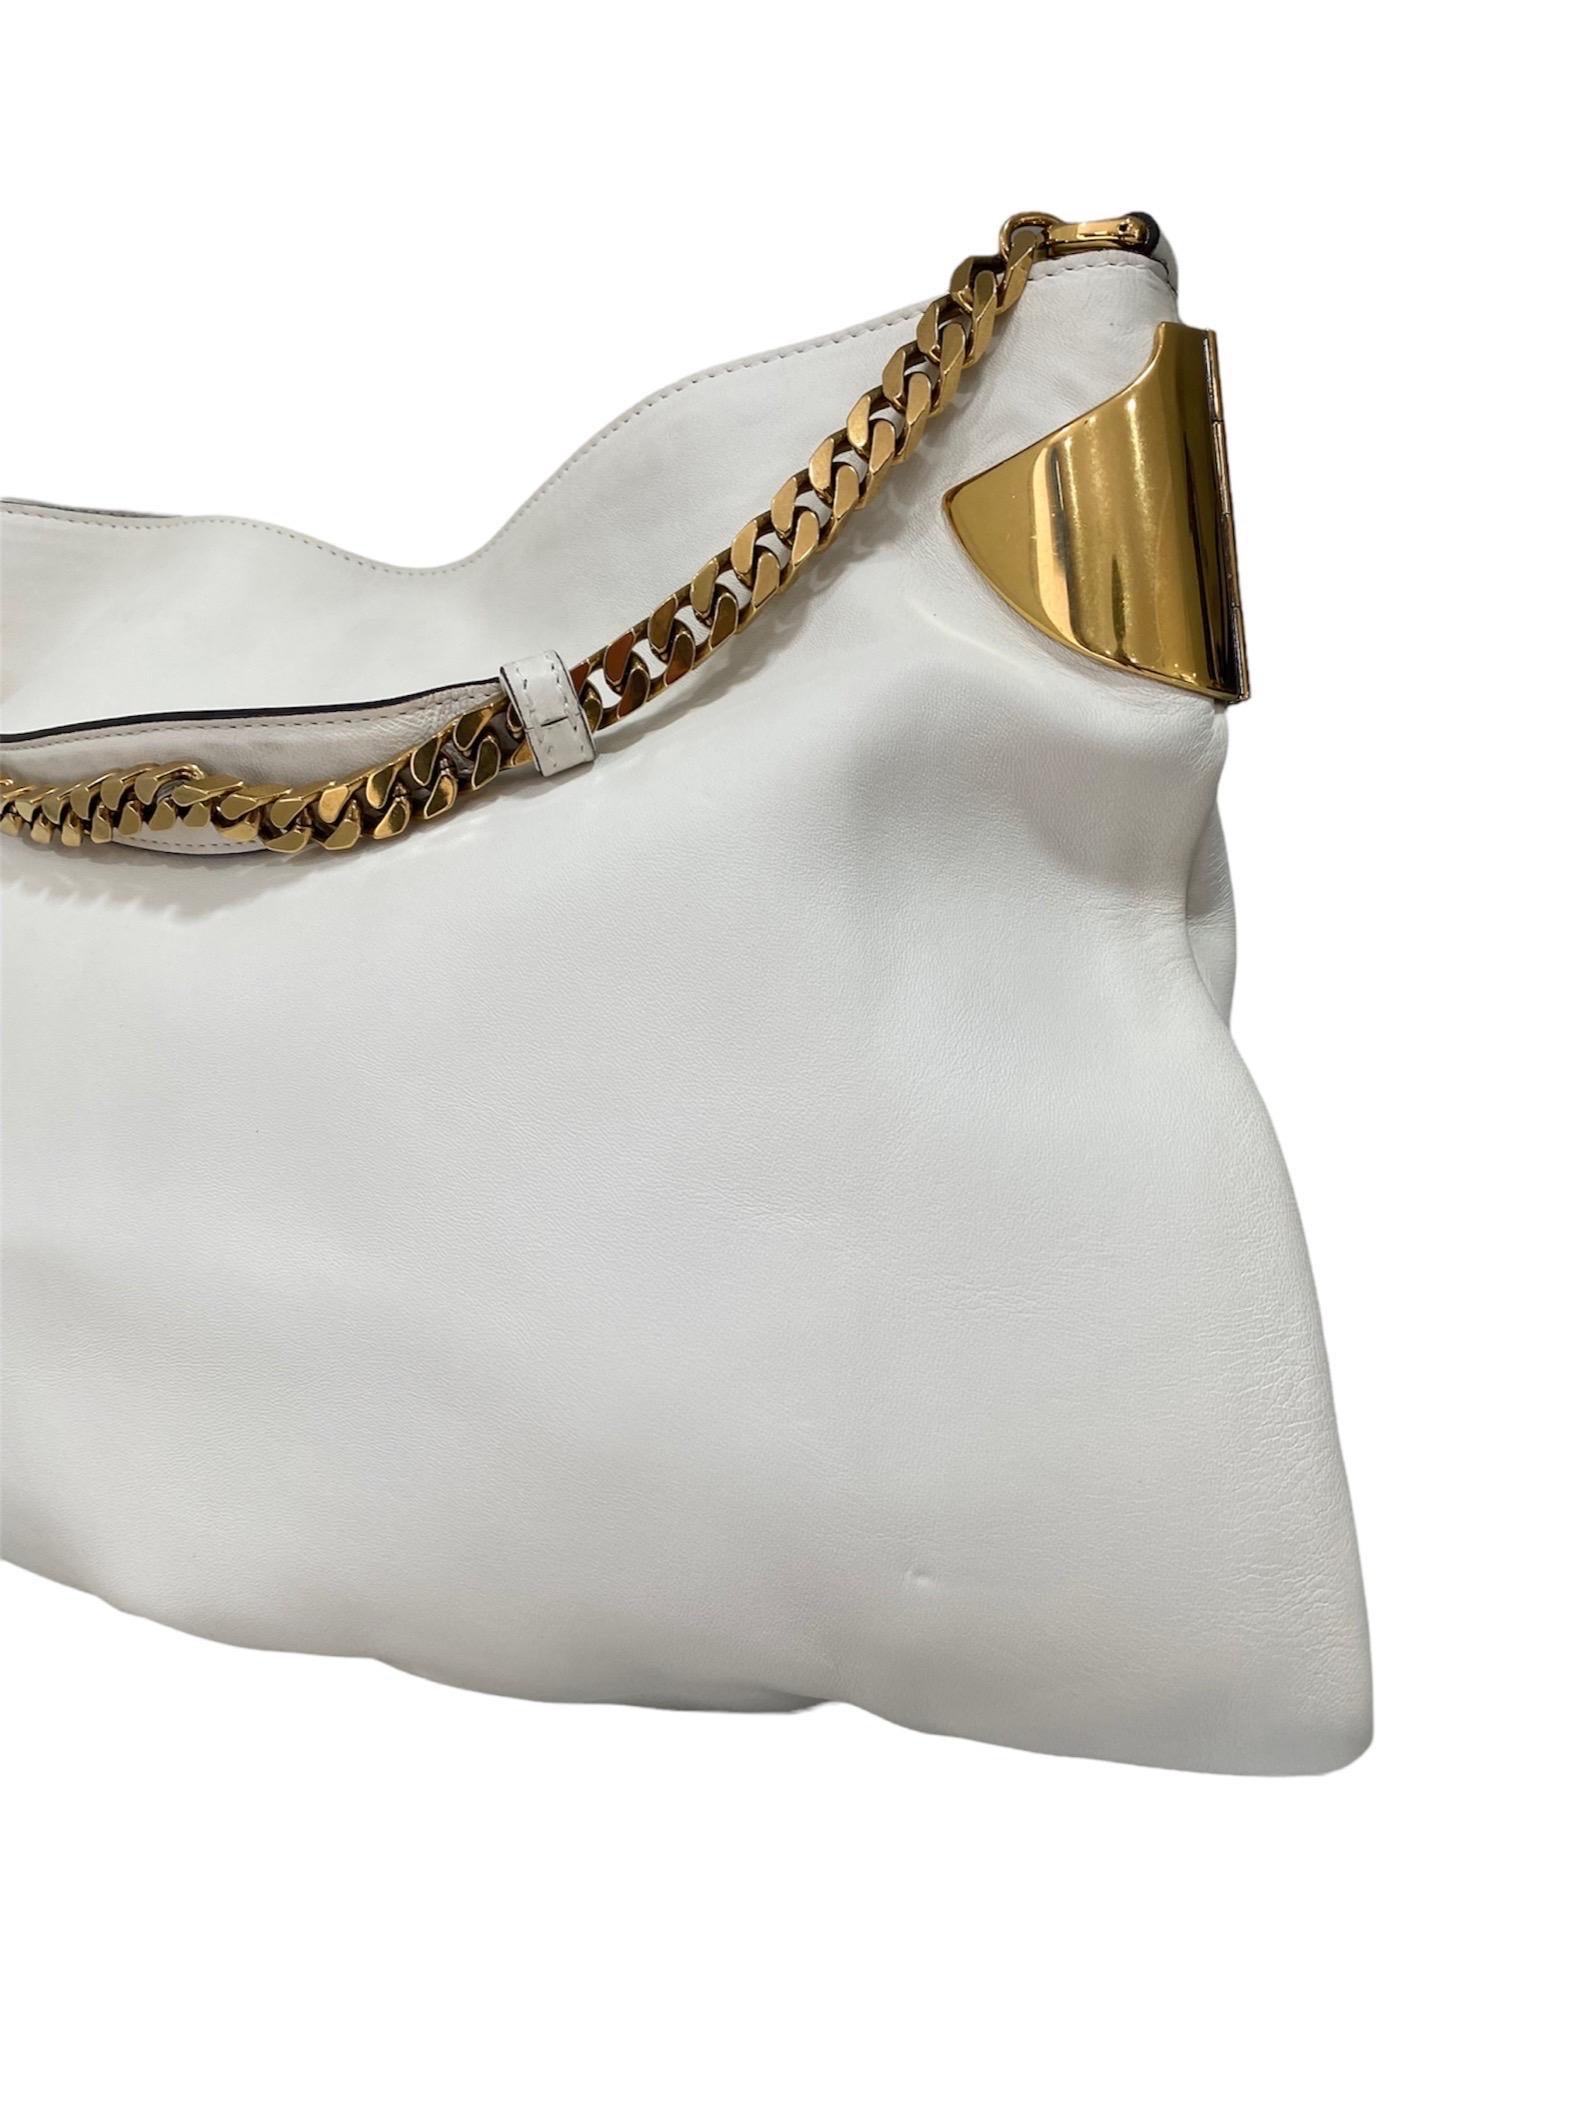 Gray Gucci Shoulder Bag White And Gold For Sale